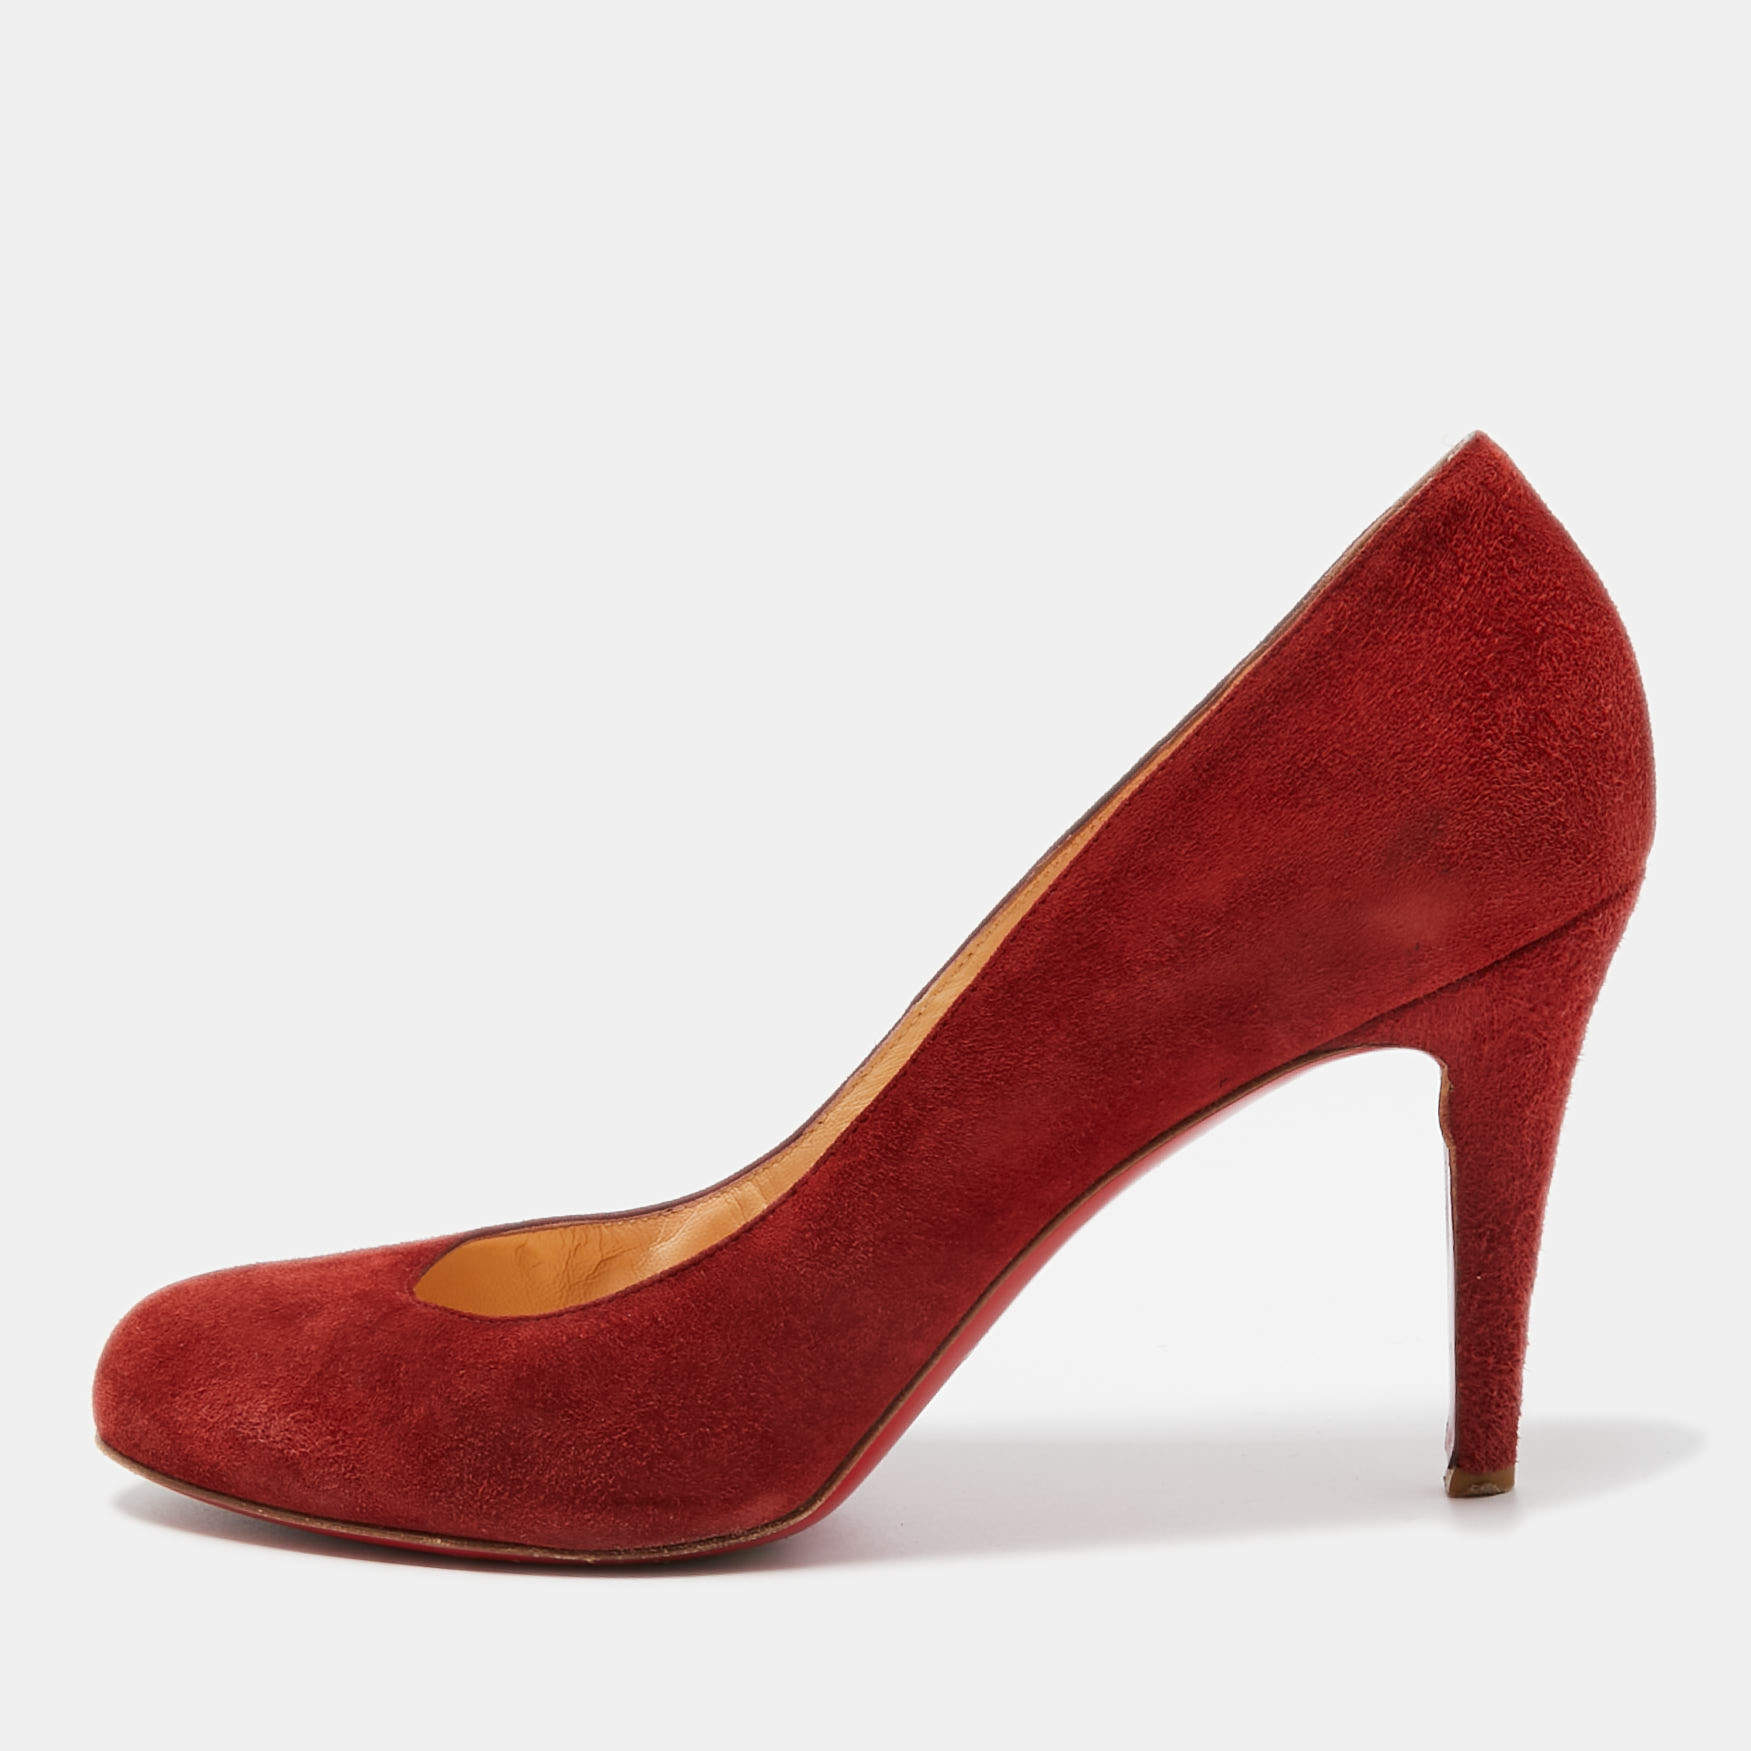 Christian Louboutin Red Suede Eloise Pumps Size 40